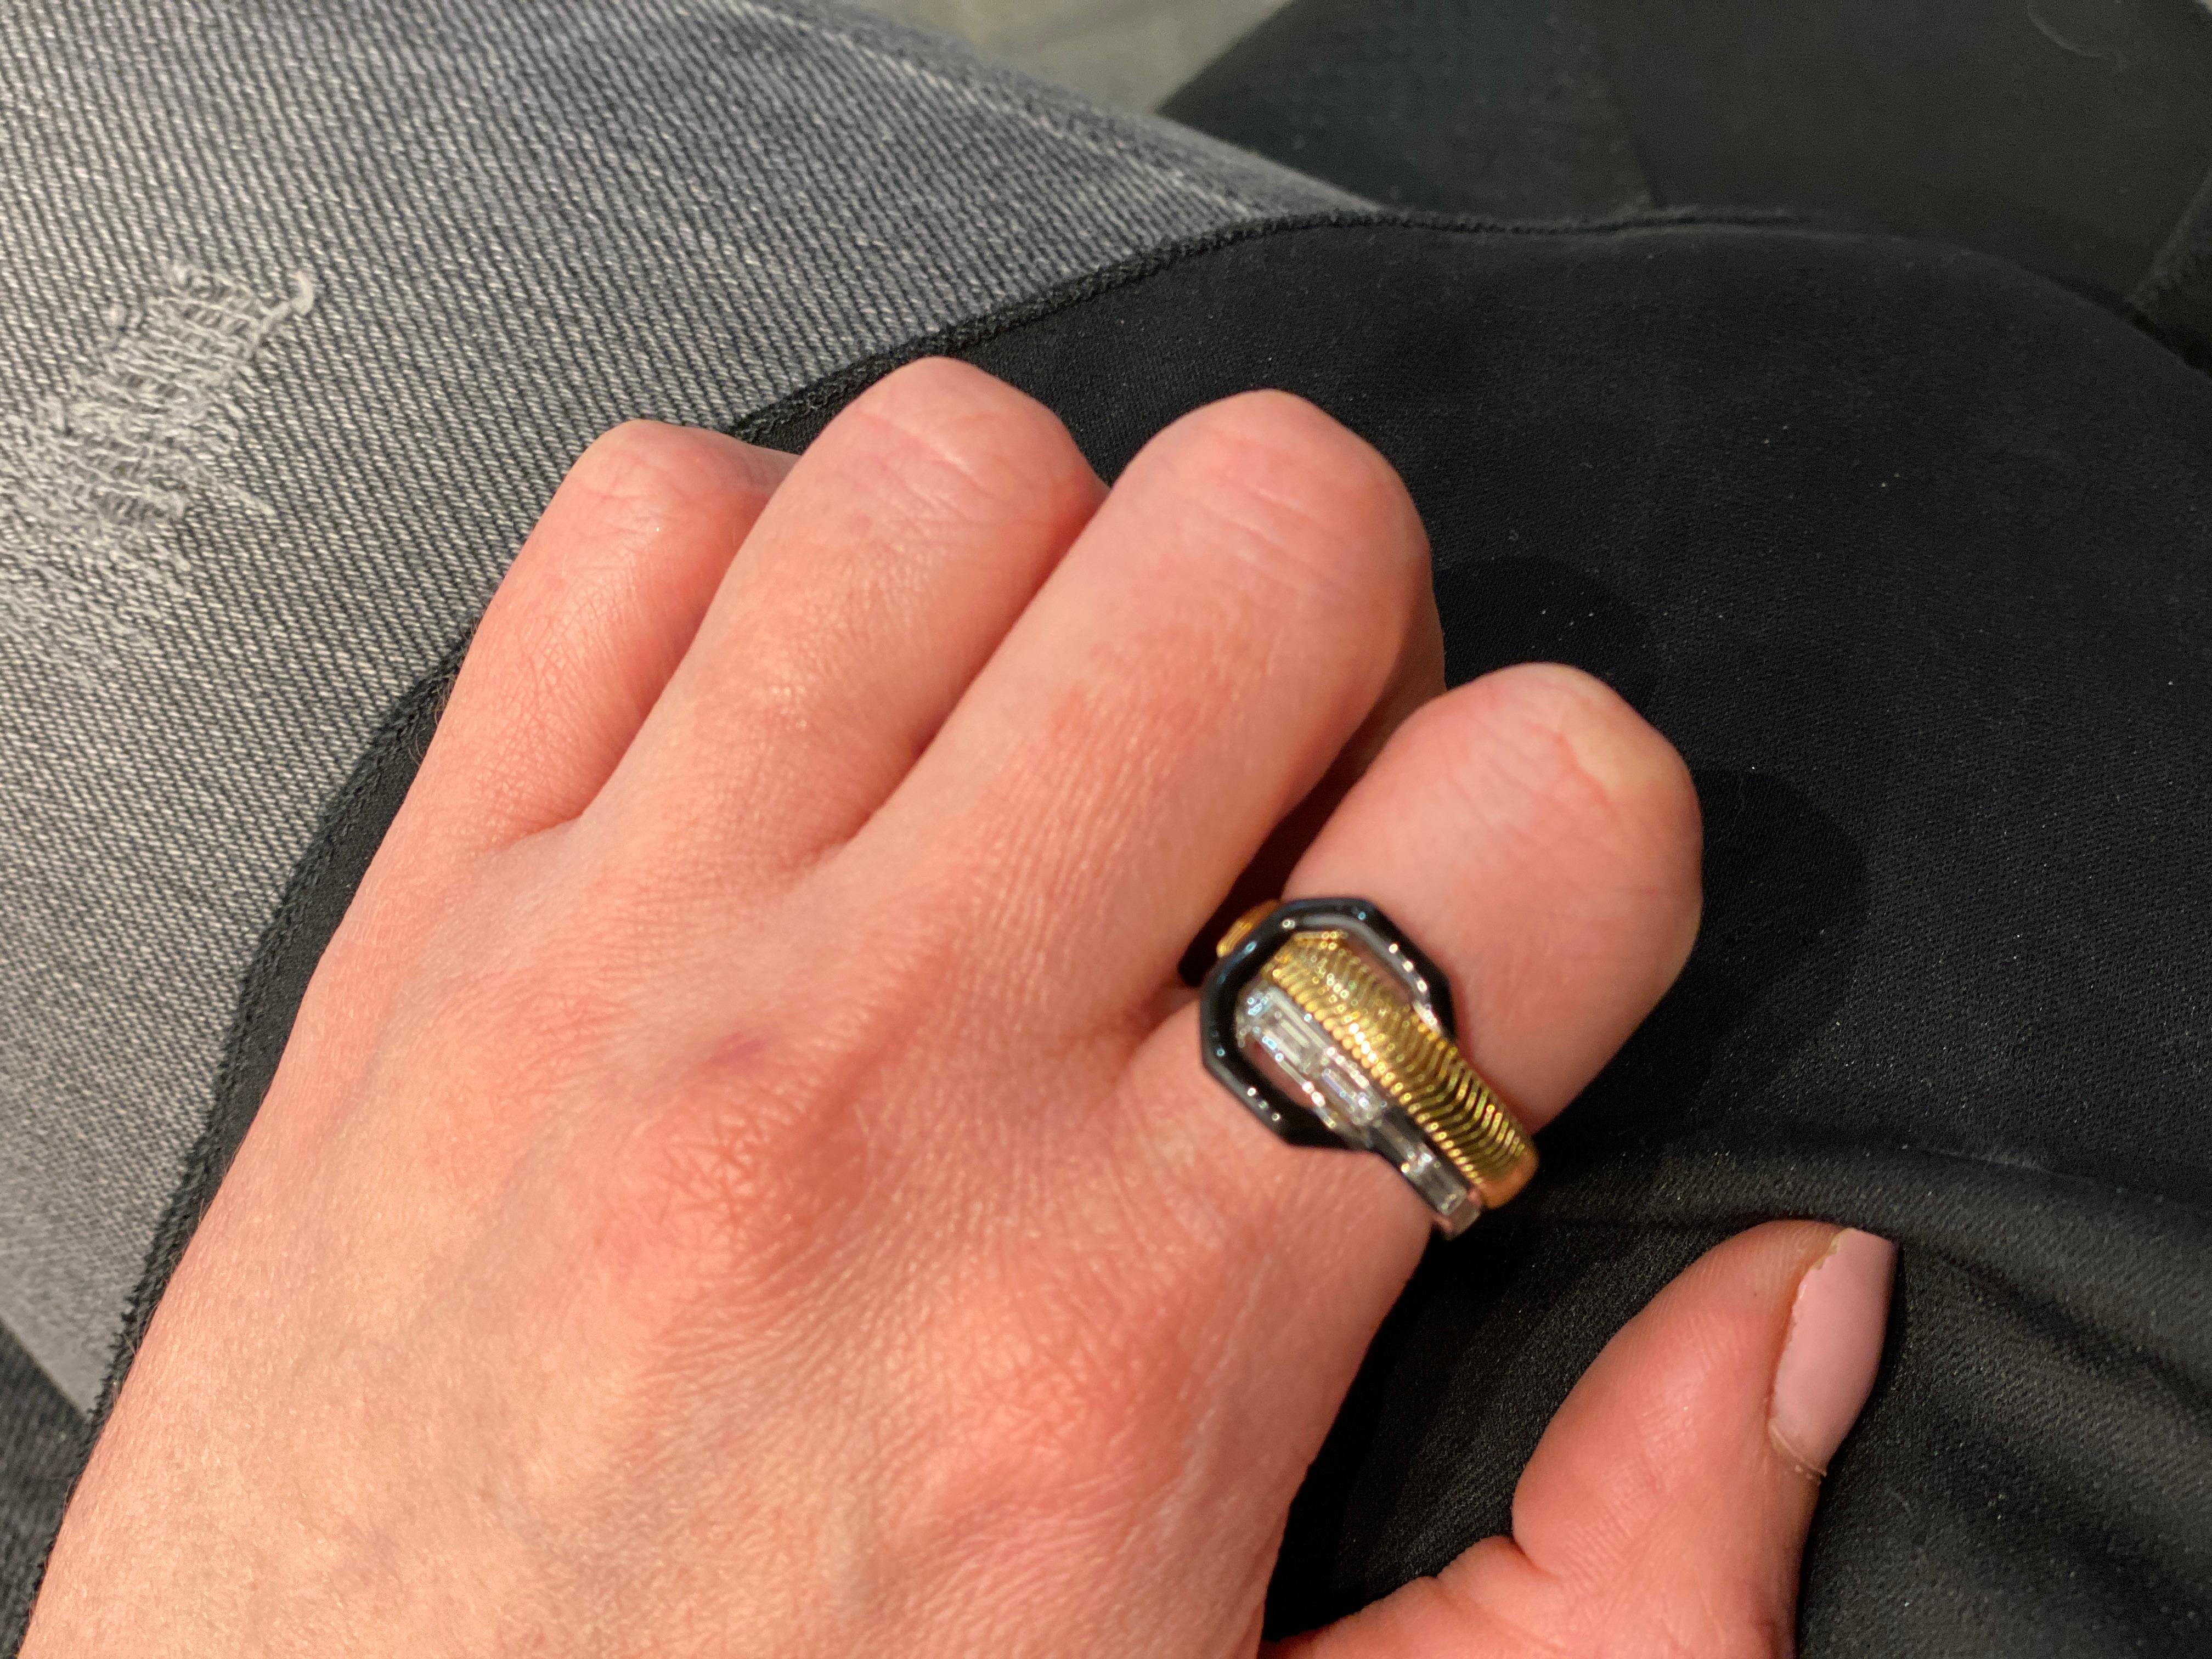 Nikos Koulis creates stunning jewelry designs that are irresistible- exuding an effortlessly elegant style.

This ring features a baguette and trillion white diamonds and black enamel set in 18K yellow gold.

Details:
18K Yellow Gold
Trillion White